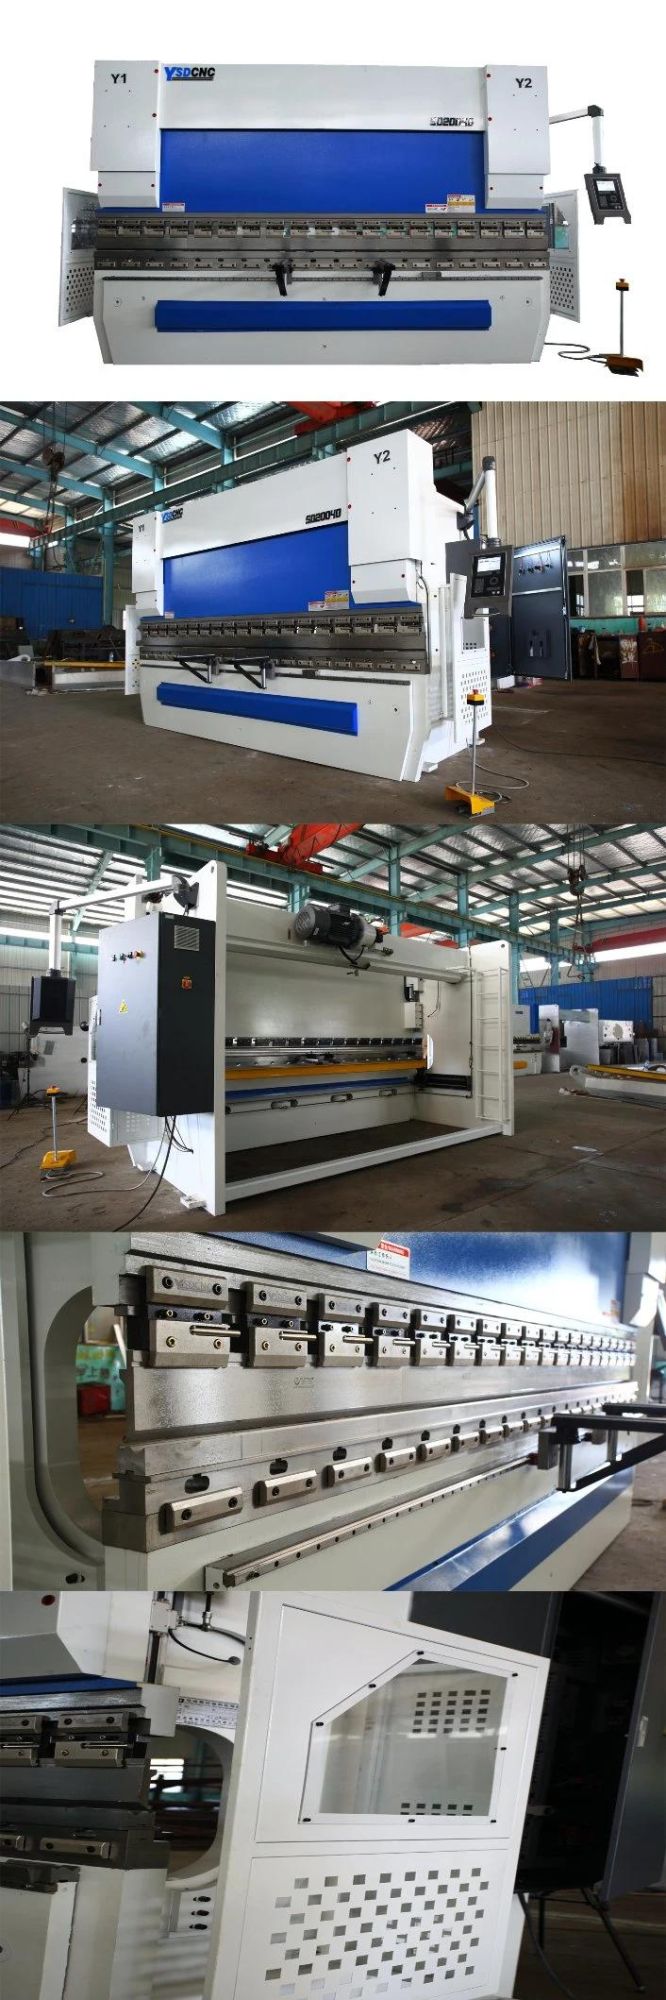 Hydraulic Plate Bending Machine with Da66t System 3+1 Axis